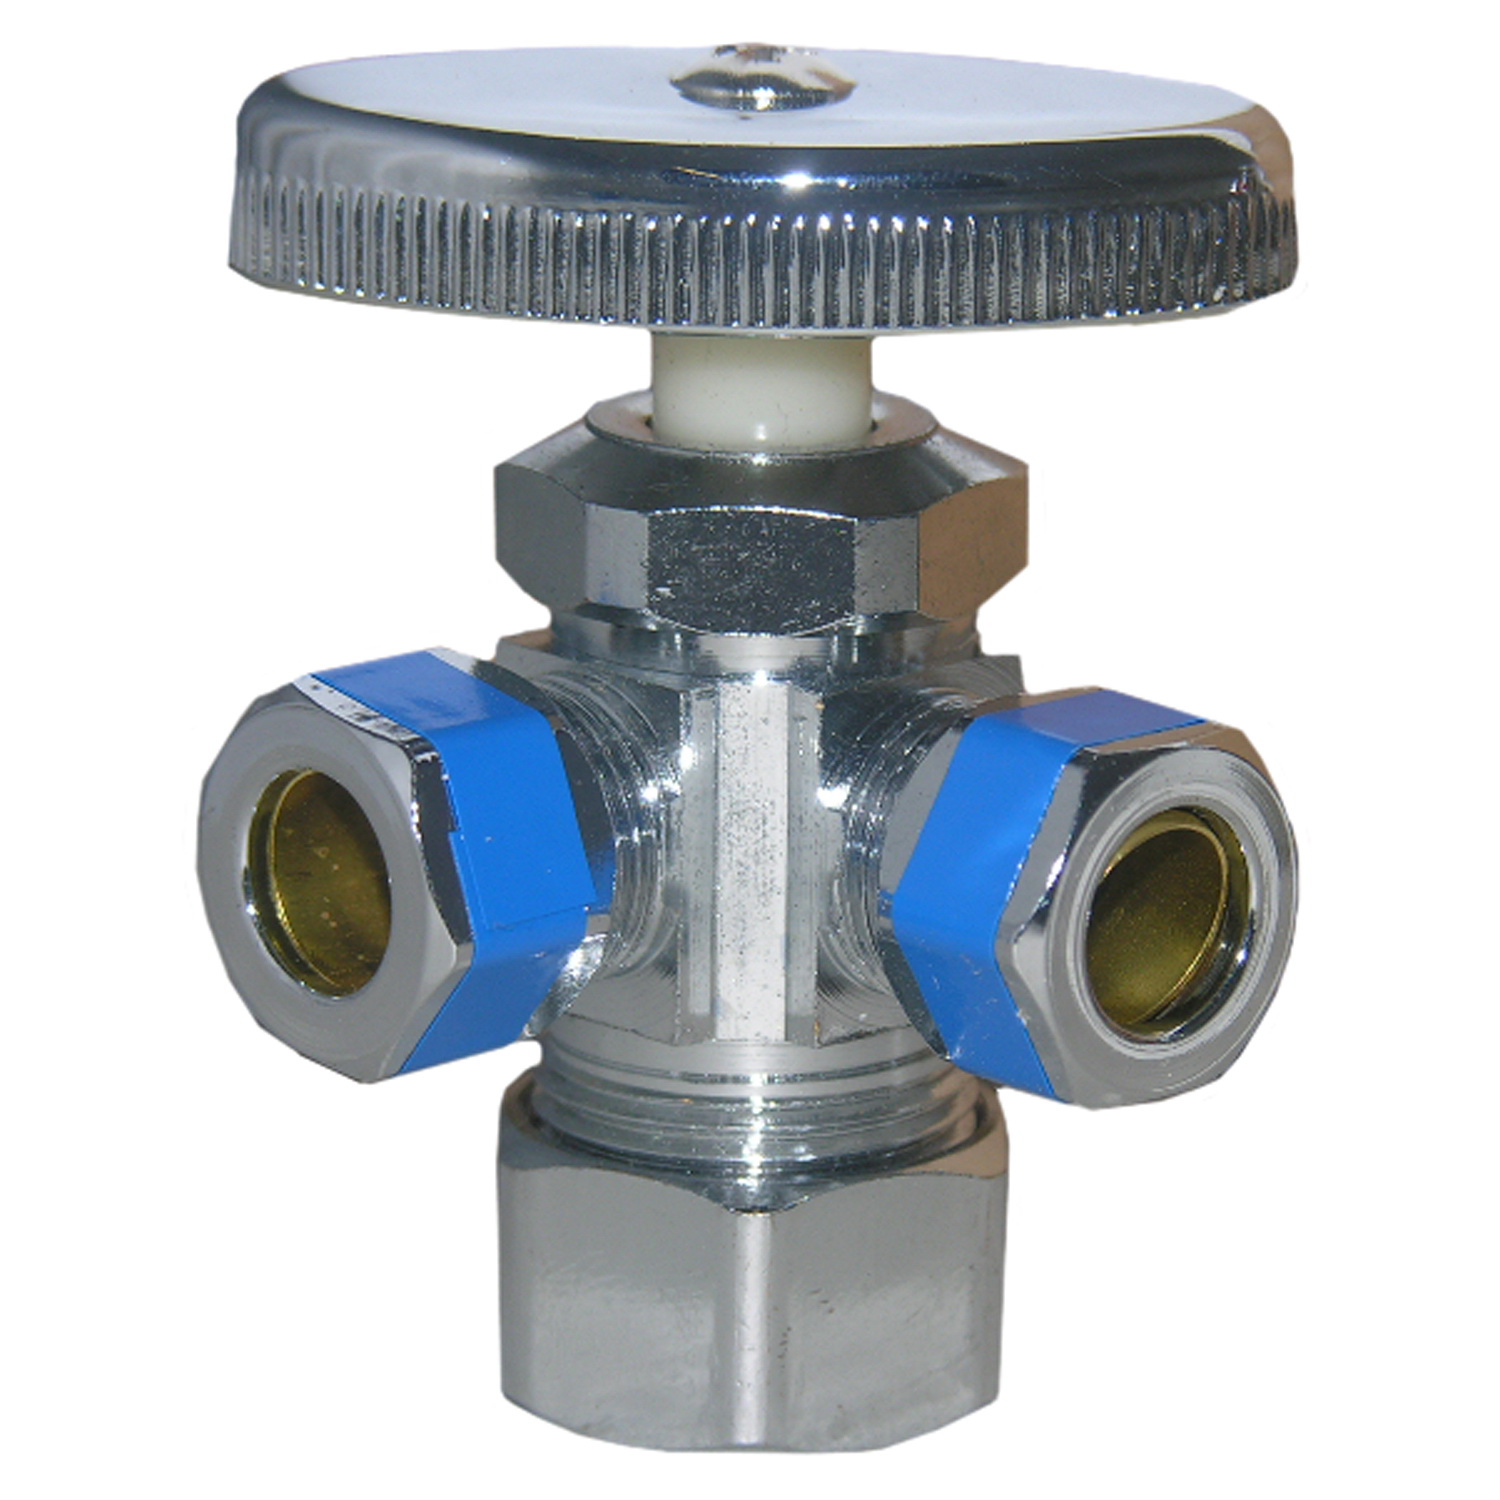 Lasco 06-7355 Angle Stop Valve, 5/8 x 3/8 x 3/8 in Connection, Compression x Compression x Compression, Brass Body